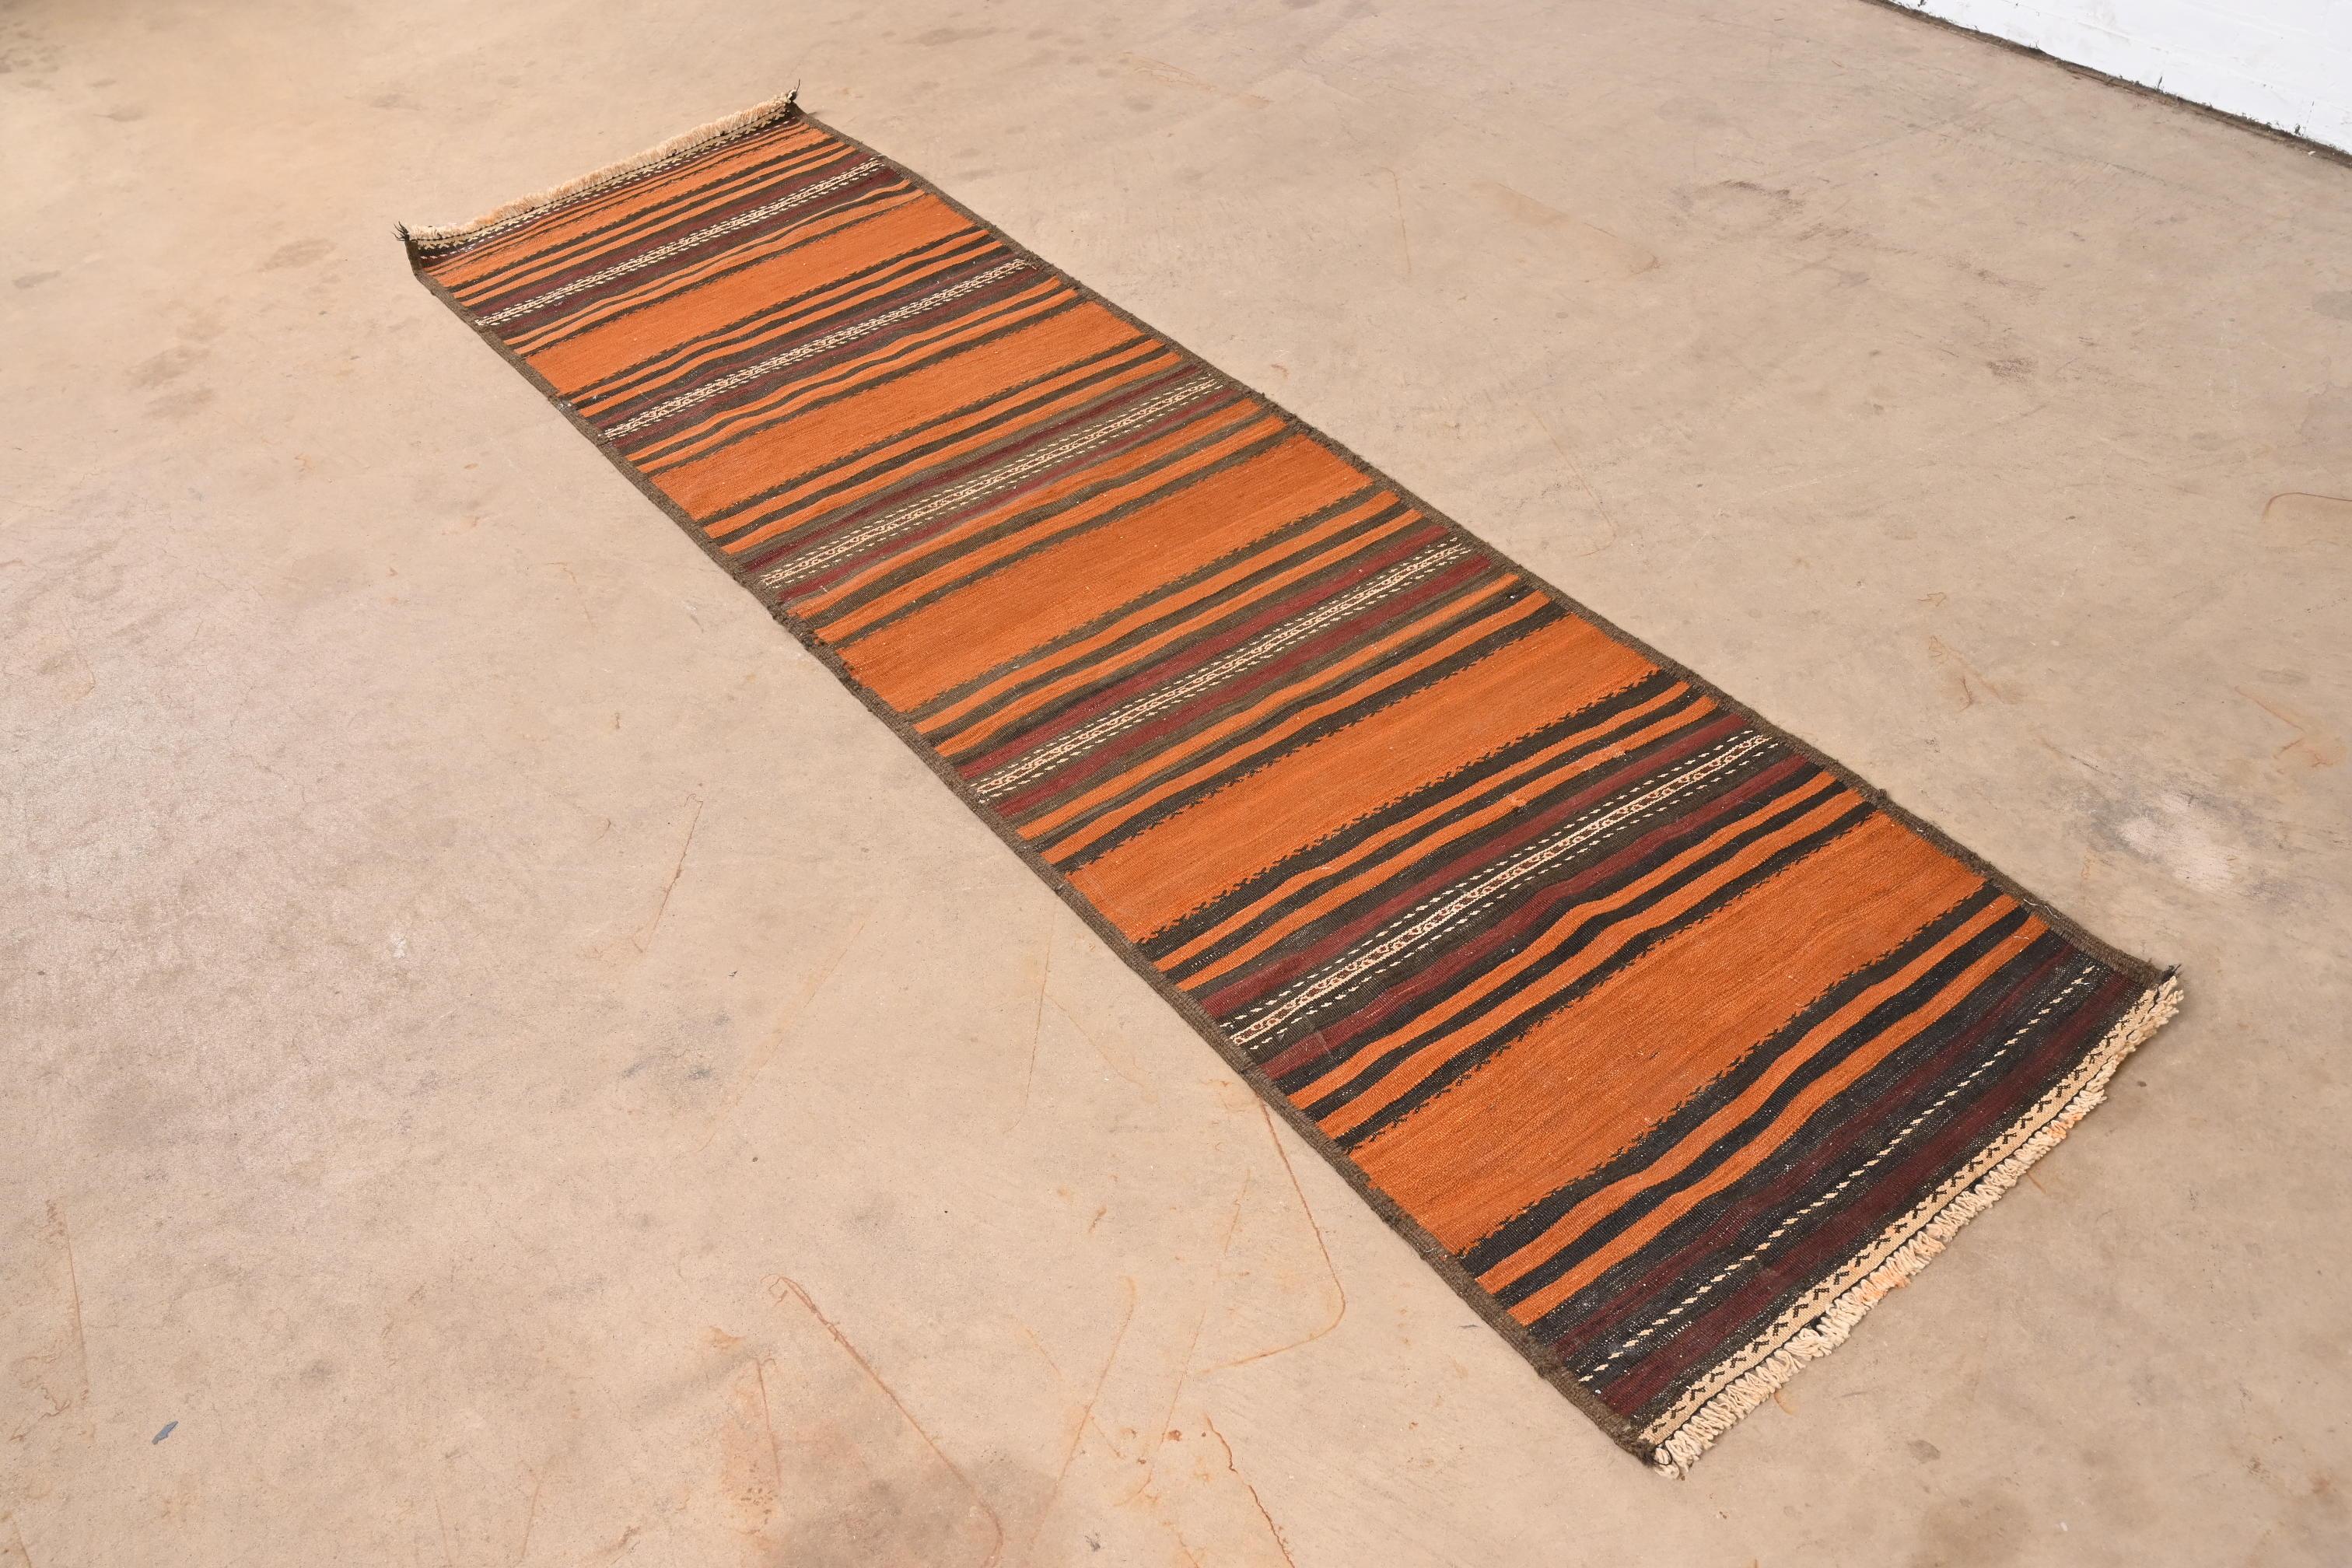 A gorgeous Mid-Century Modern hand-woven Afghan Kilim flat weave runner rug.

Mid-20th century.

Beautiful striped design, with predominant colors in orange, maroon, black, and ivory.

Measures: 26.5